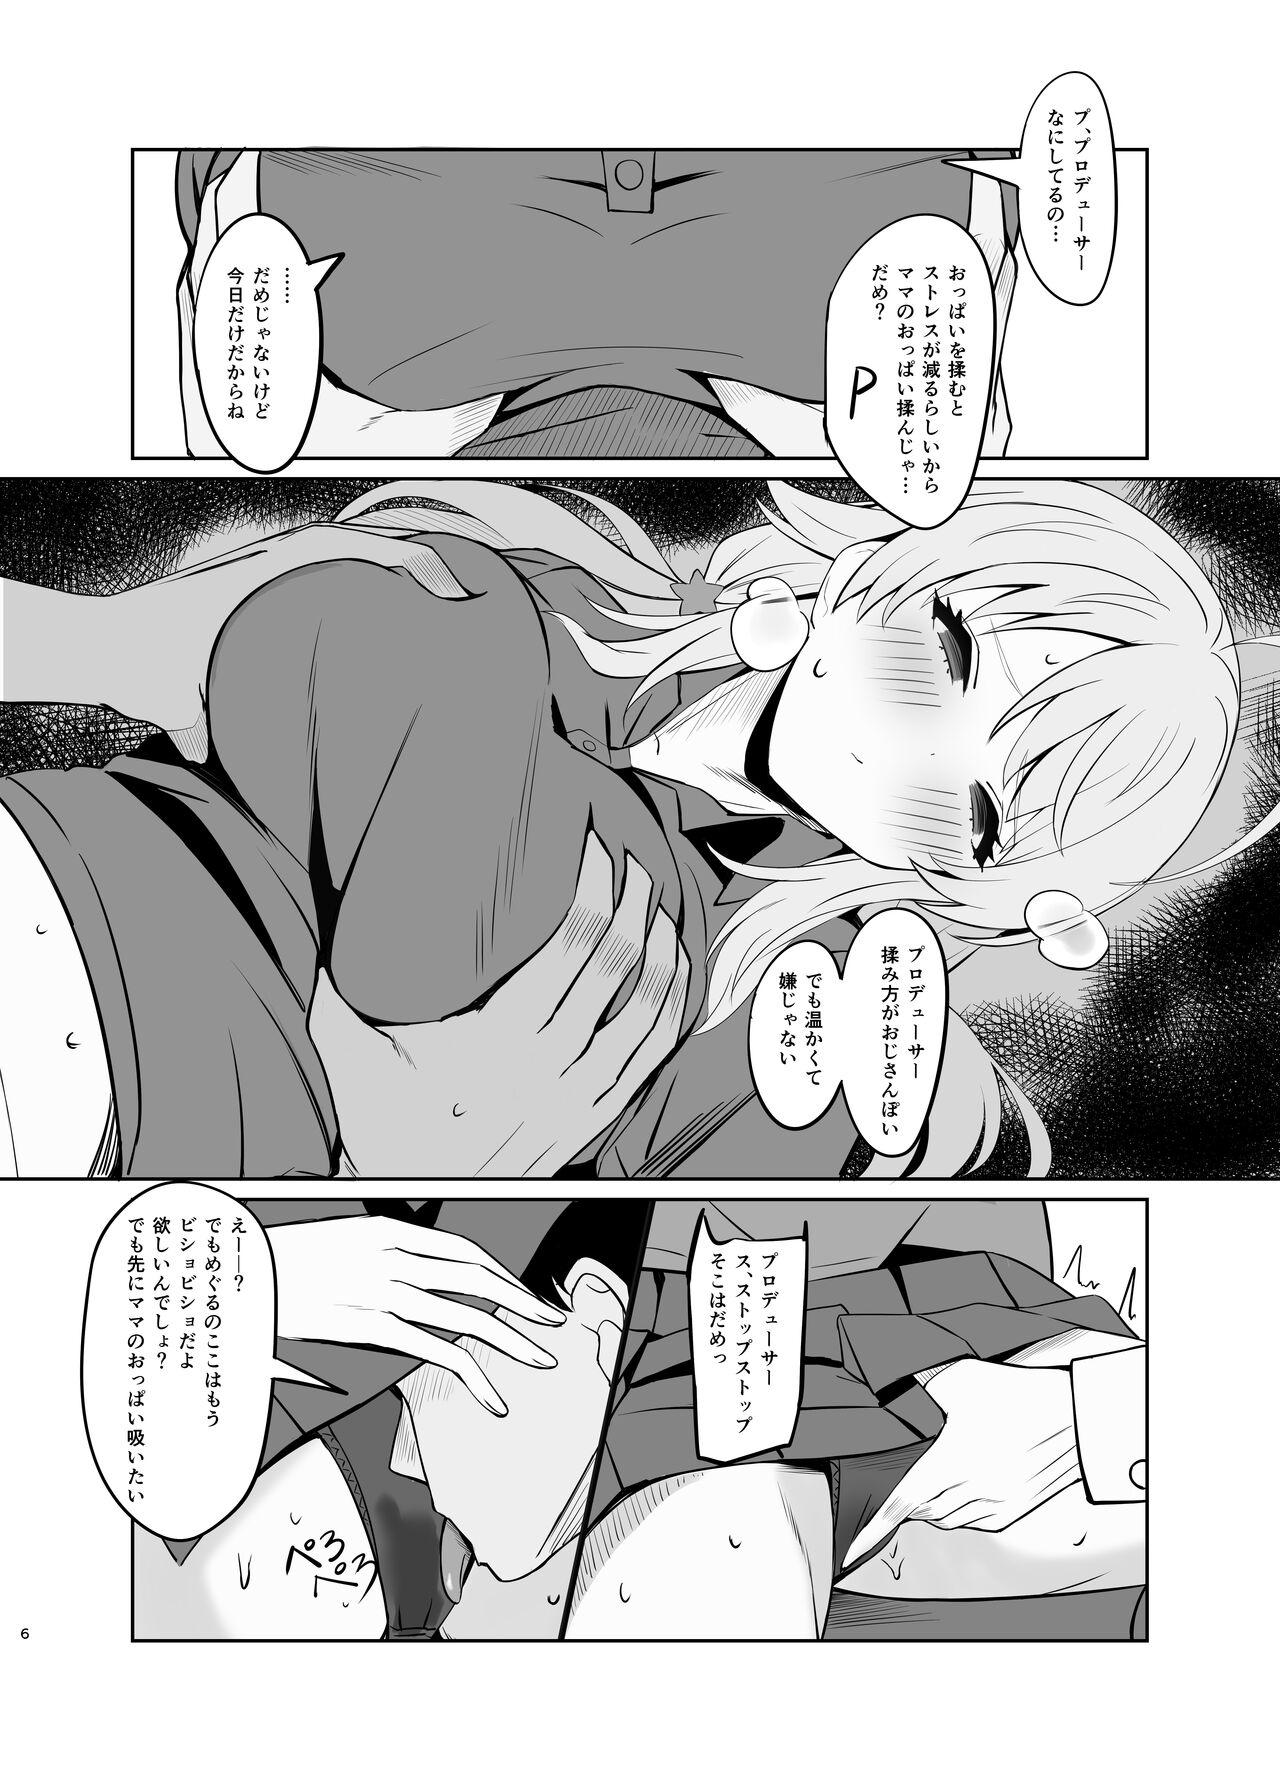 Animated 癒やしTIME - The idolmaster 18yearsold - Page 4